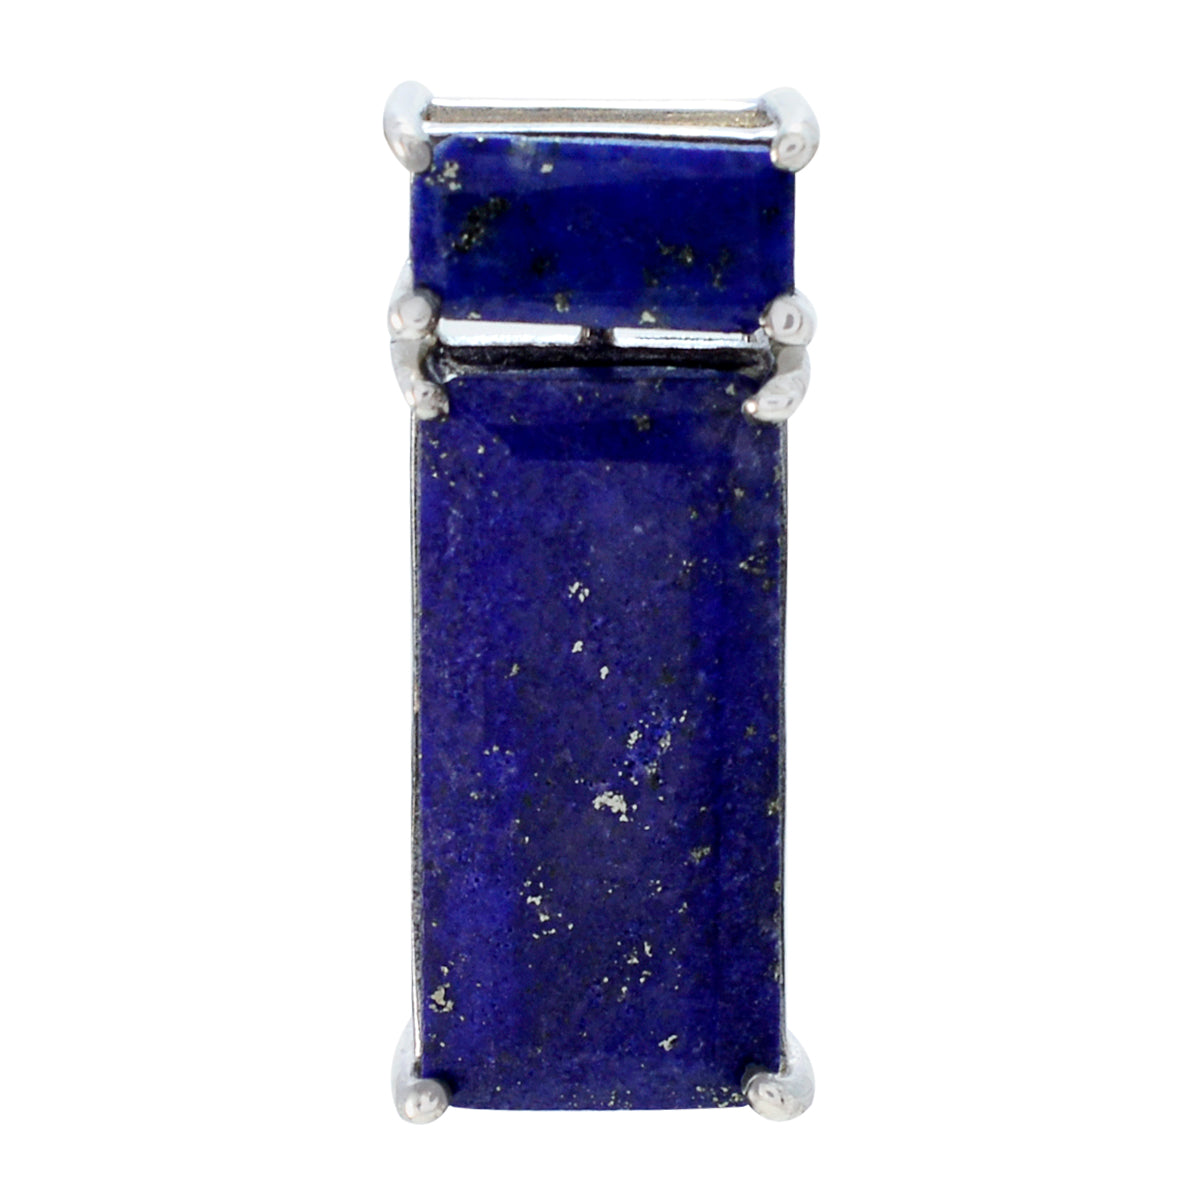 Riyo Real Gemstones Octogon Faceted Nevy Blue Lapis Lazuli 925 Sterling Silver Pendant gift for new years day